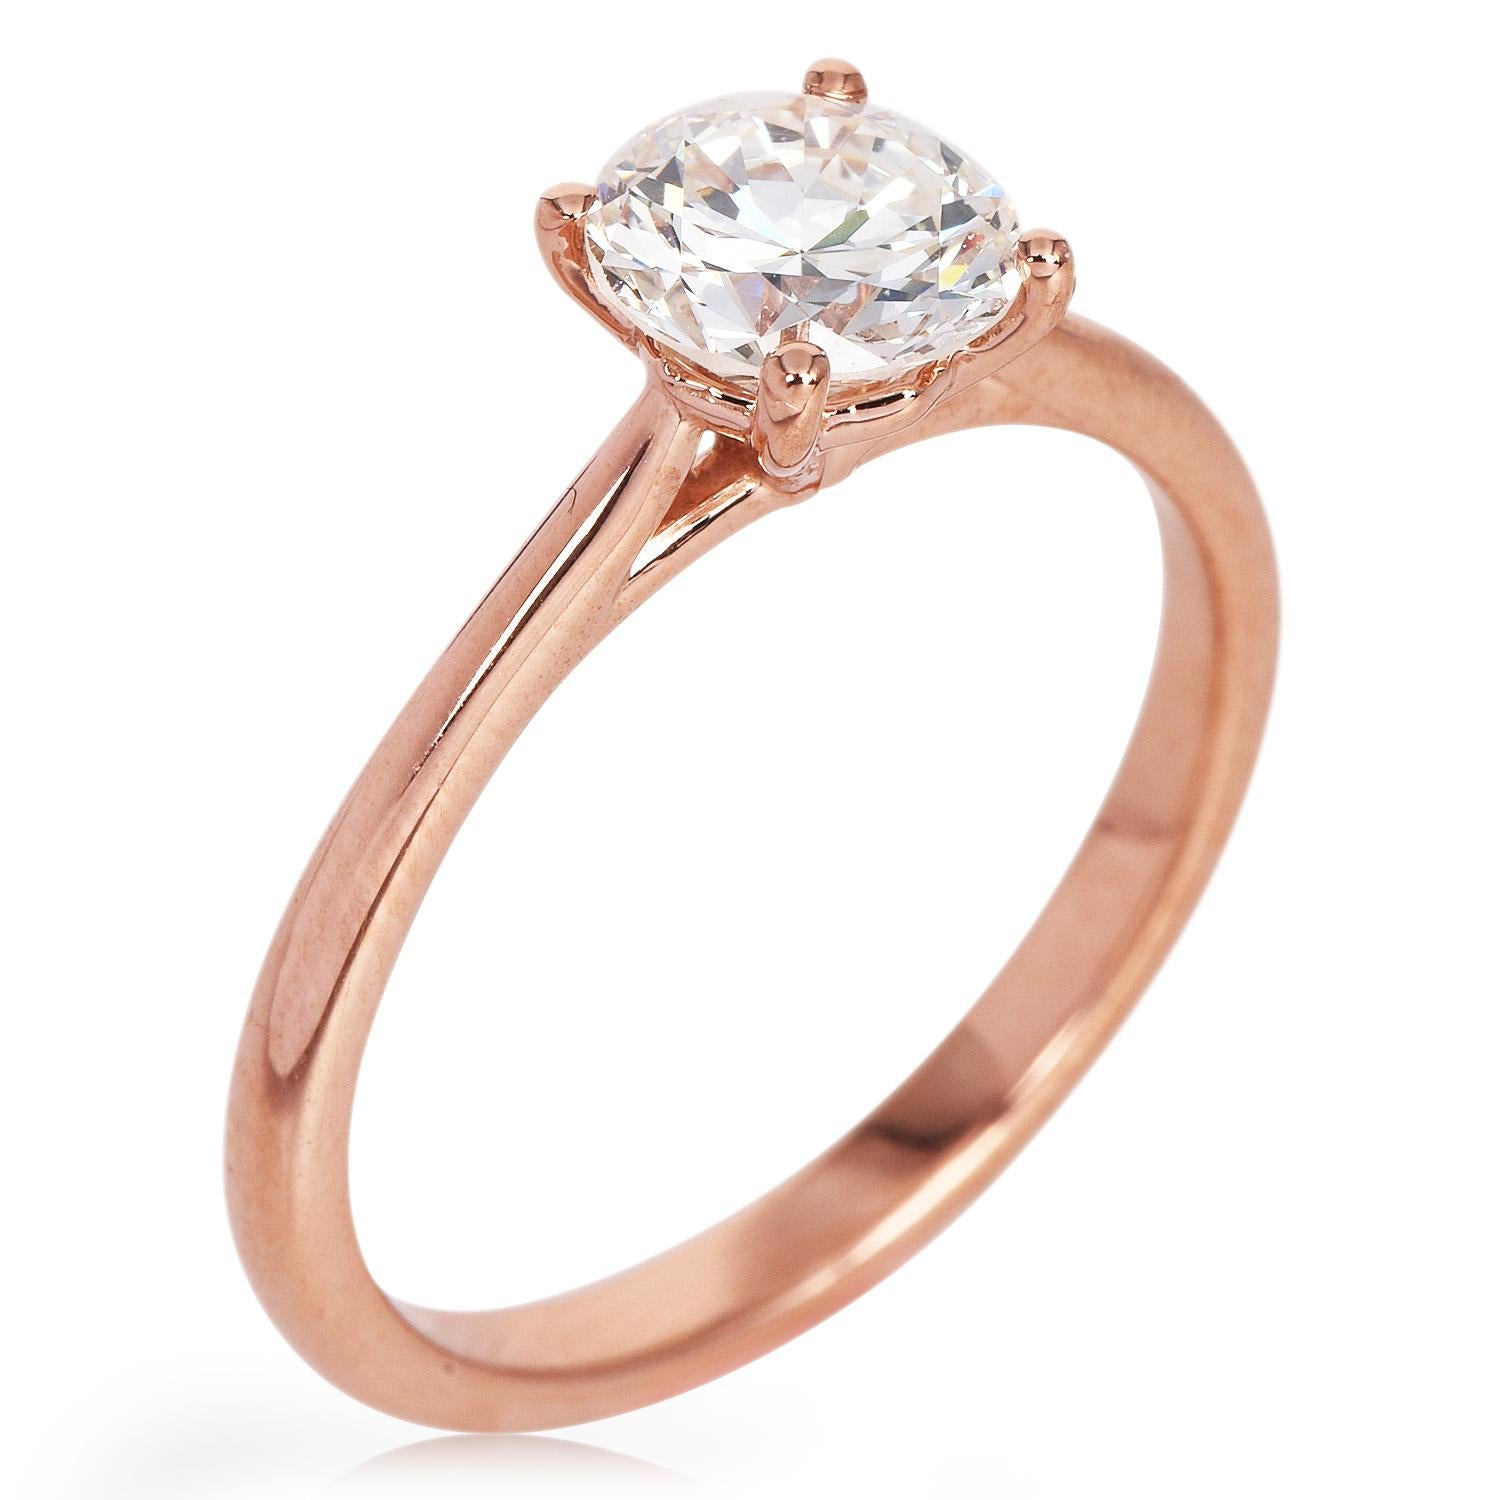 GIA 1.16 J-VS1 Carat Round Cut Diamond Rose Gold Solitaire Engagement Ring In New Condition For Sale In Miami, FL